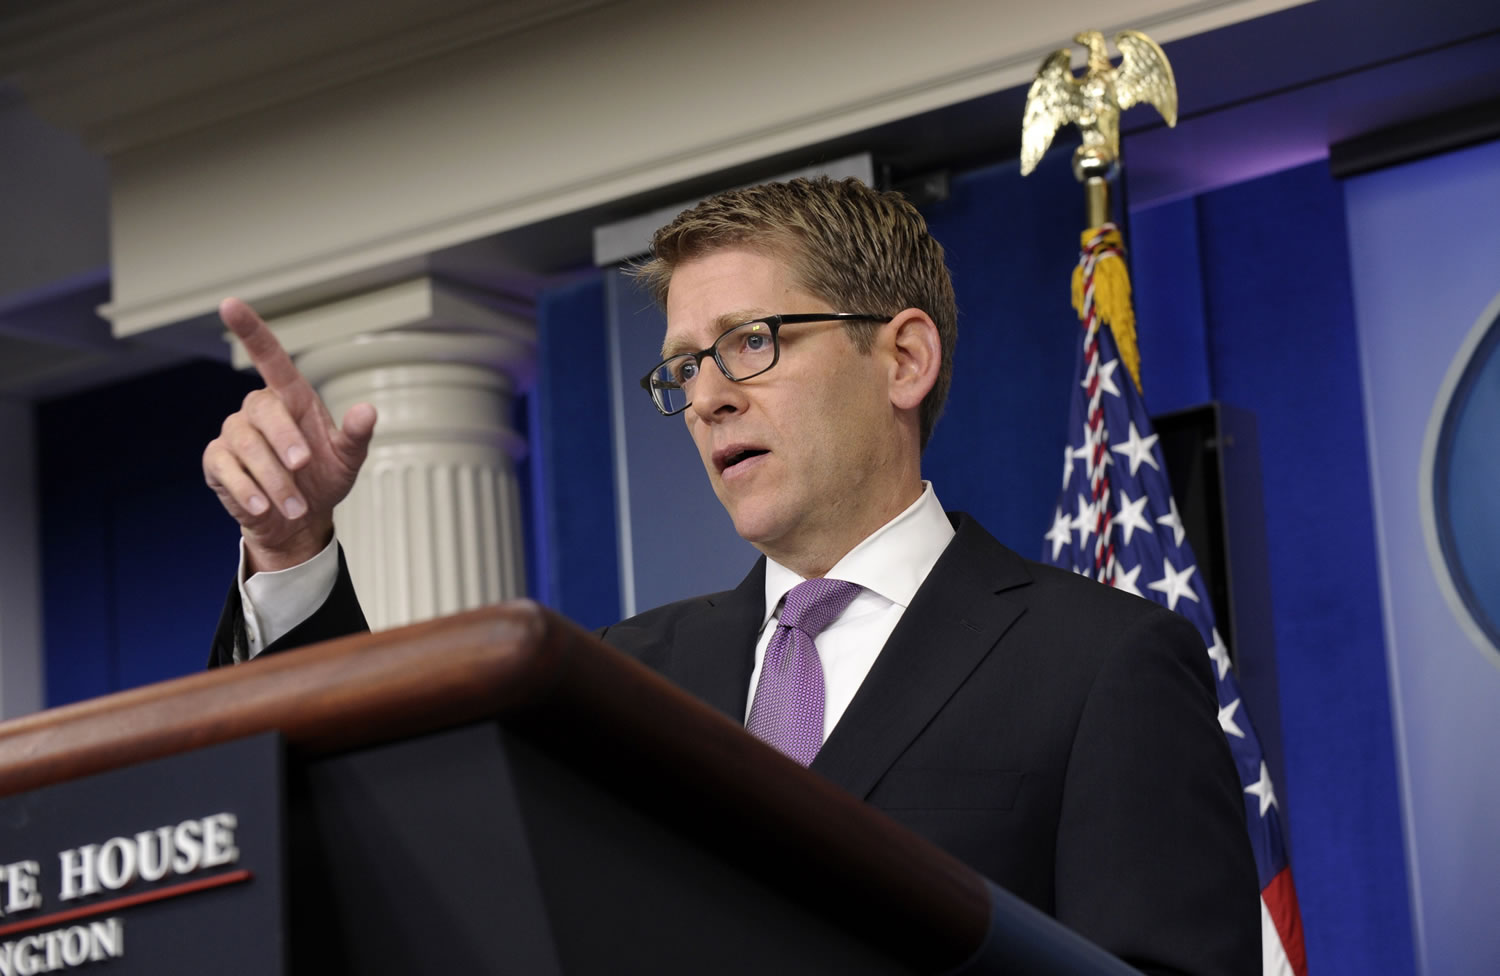 White House press secretary Jay Carney gestures as he speaks during the daily briefing at the White House in Washington on Tuesday.